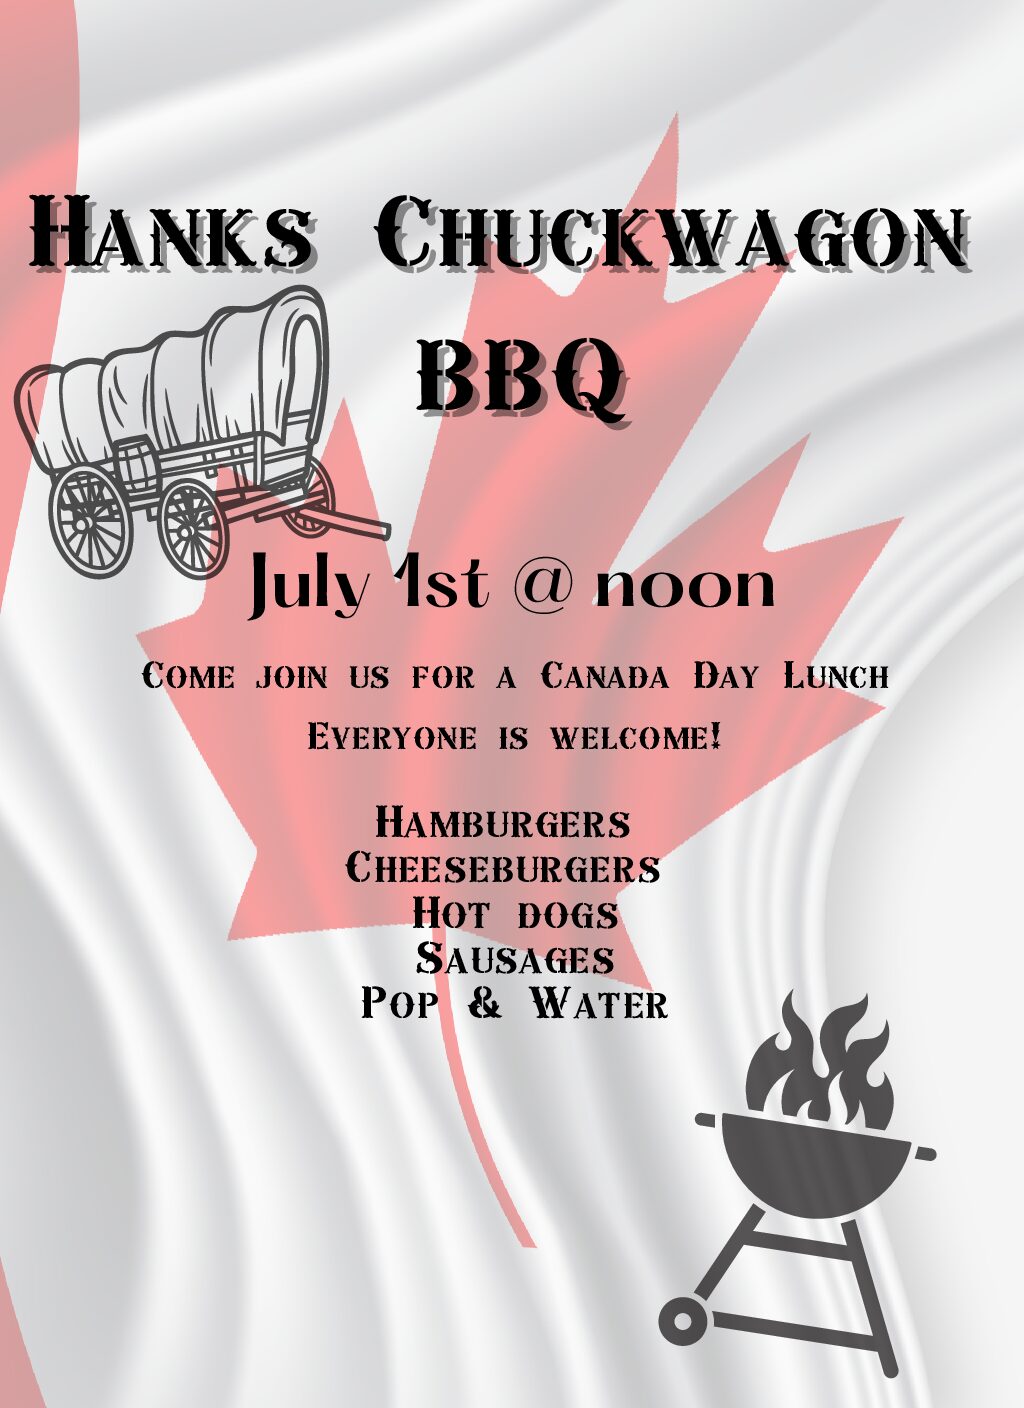 CANADA DAY AT HANK SNOW GAZEBO PARK AREA…BBQ & MUSEUM OPEN